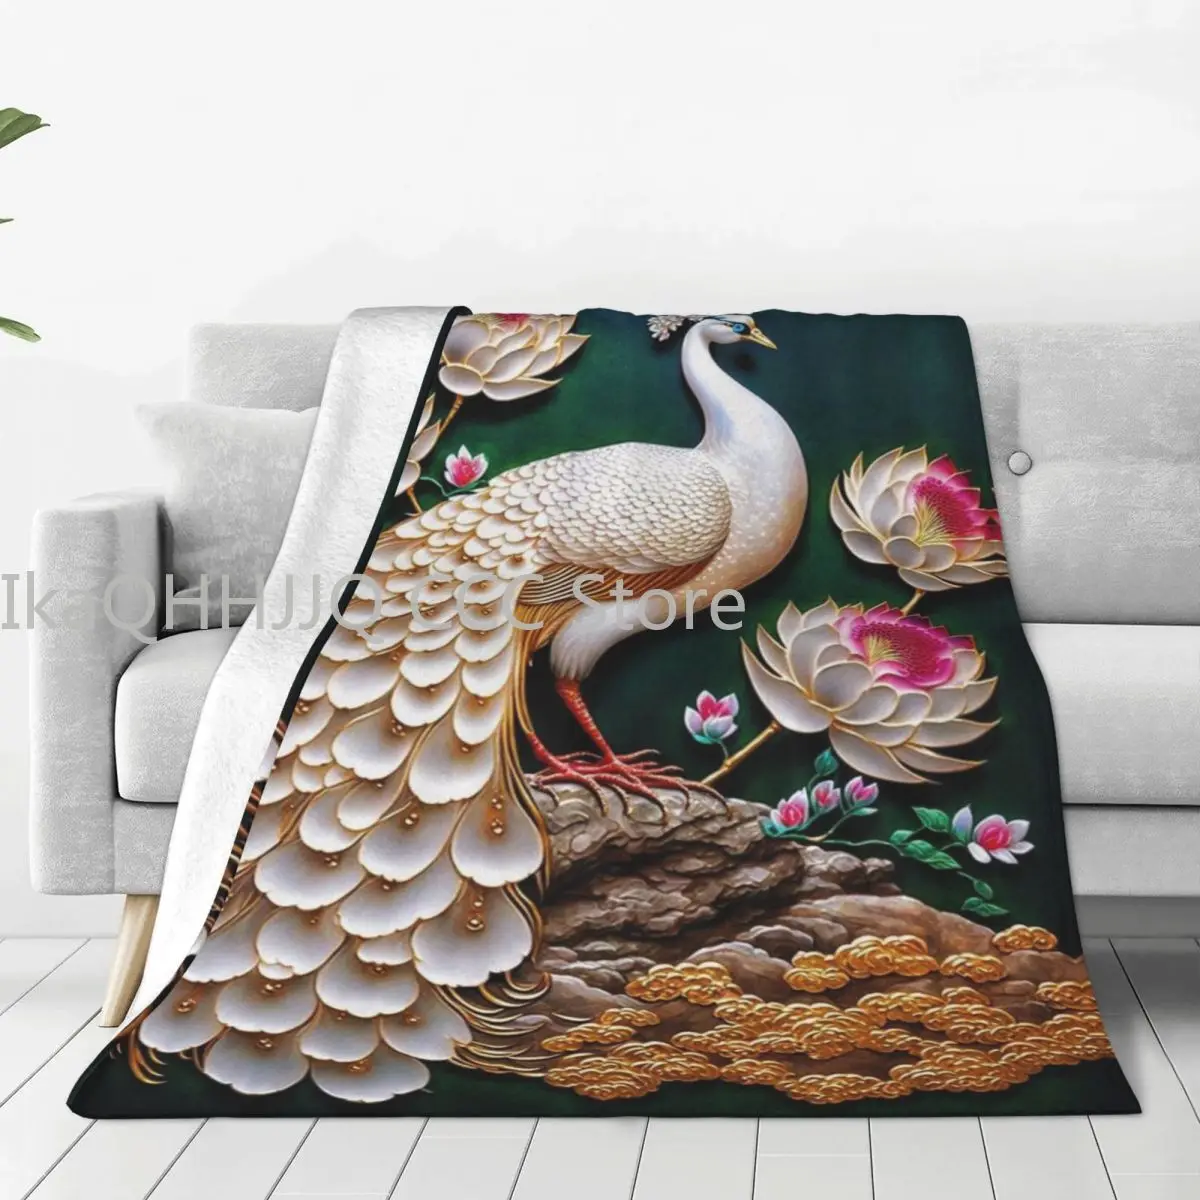 

Peacock Blankets Elegant Animal Flower Travel Office Flannel Bedding Throws Super Warm Living Room Customized Bedspread Gift